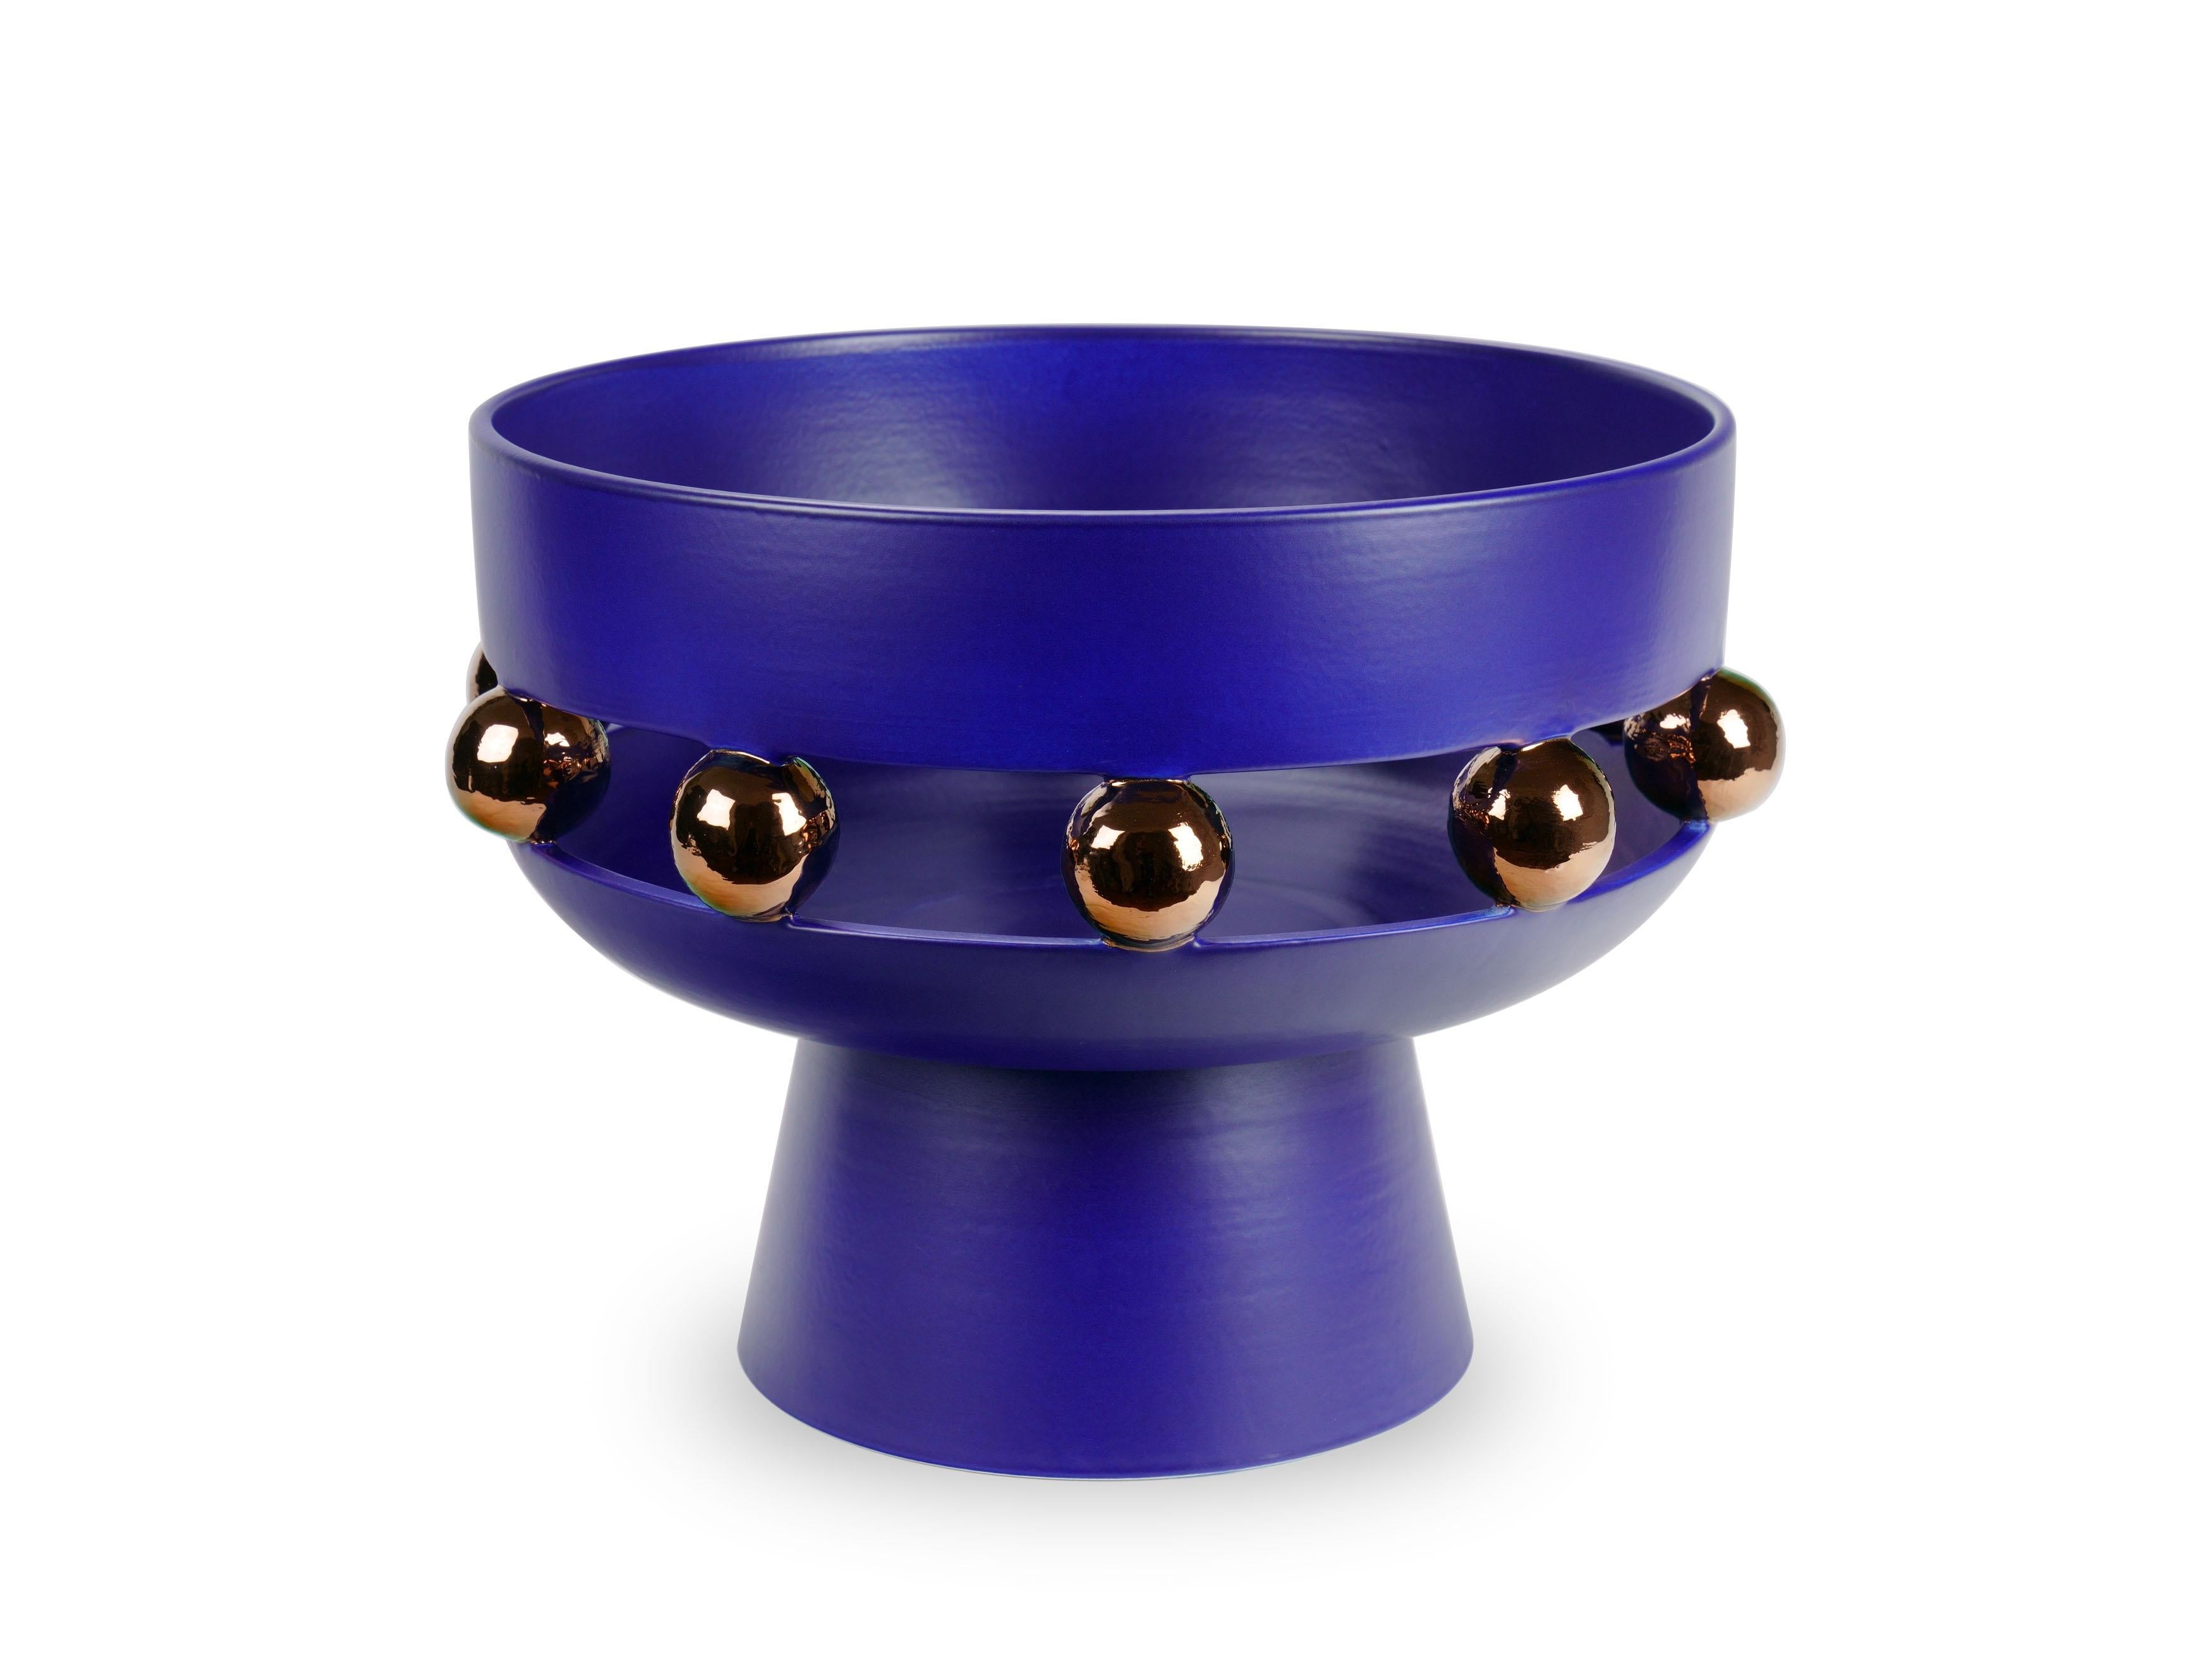 Large ultramarine blue riser bowl or centerpiece vase with a matte finishing, alternating with reflective surfaces embellished with copper metallic luster. This technique sees ceramics to undergo three cooking phases: the last one, called third